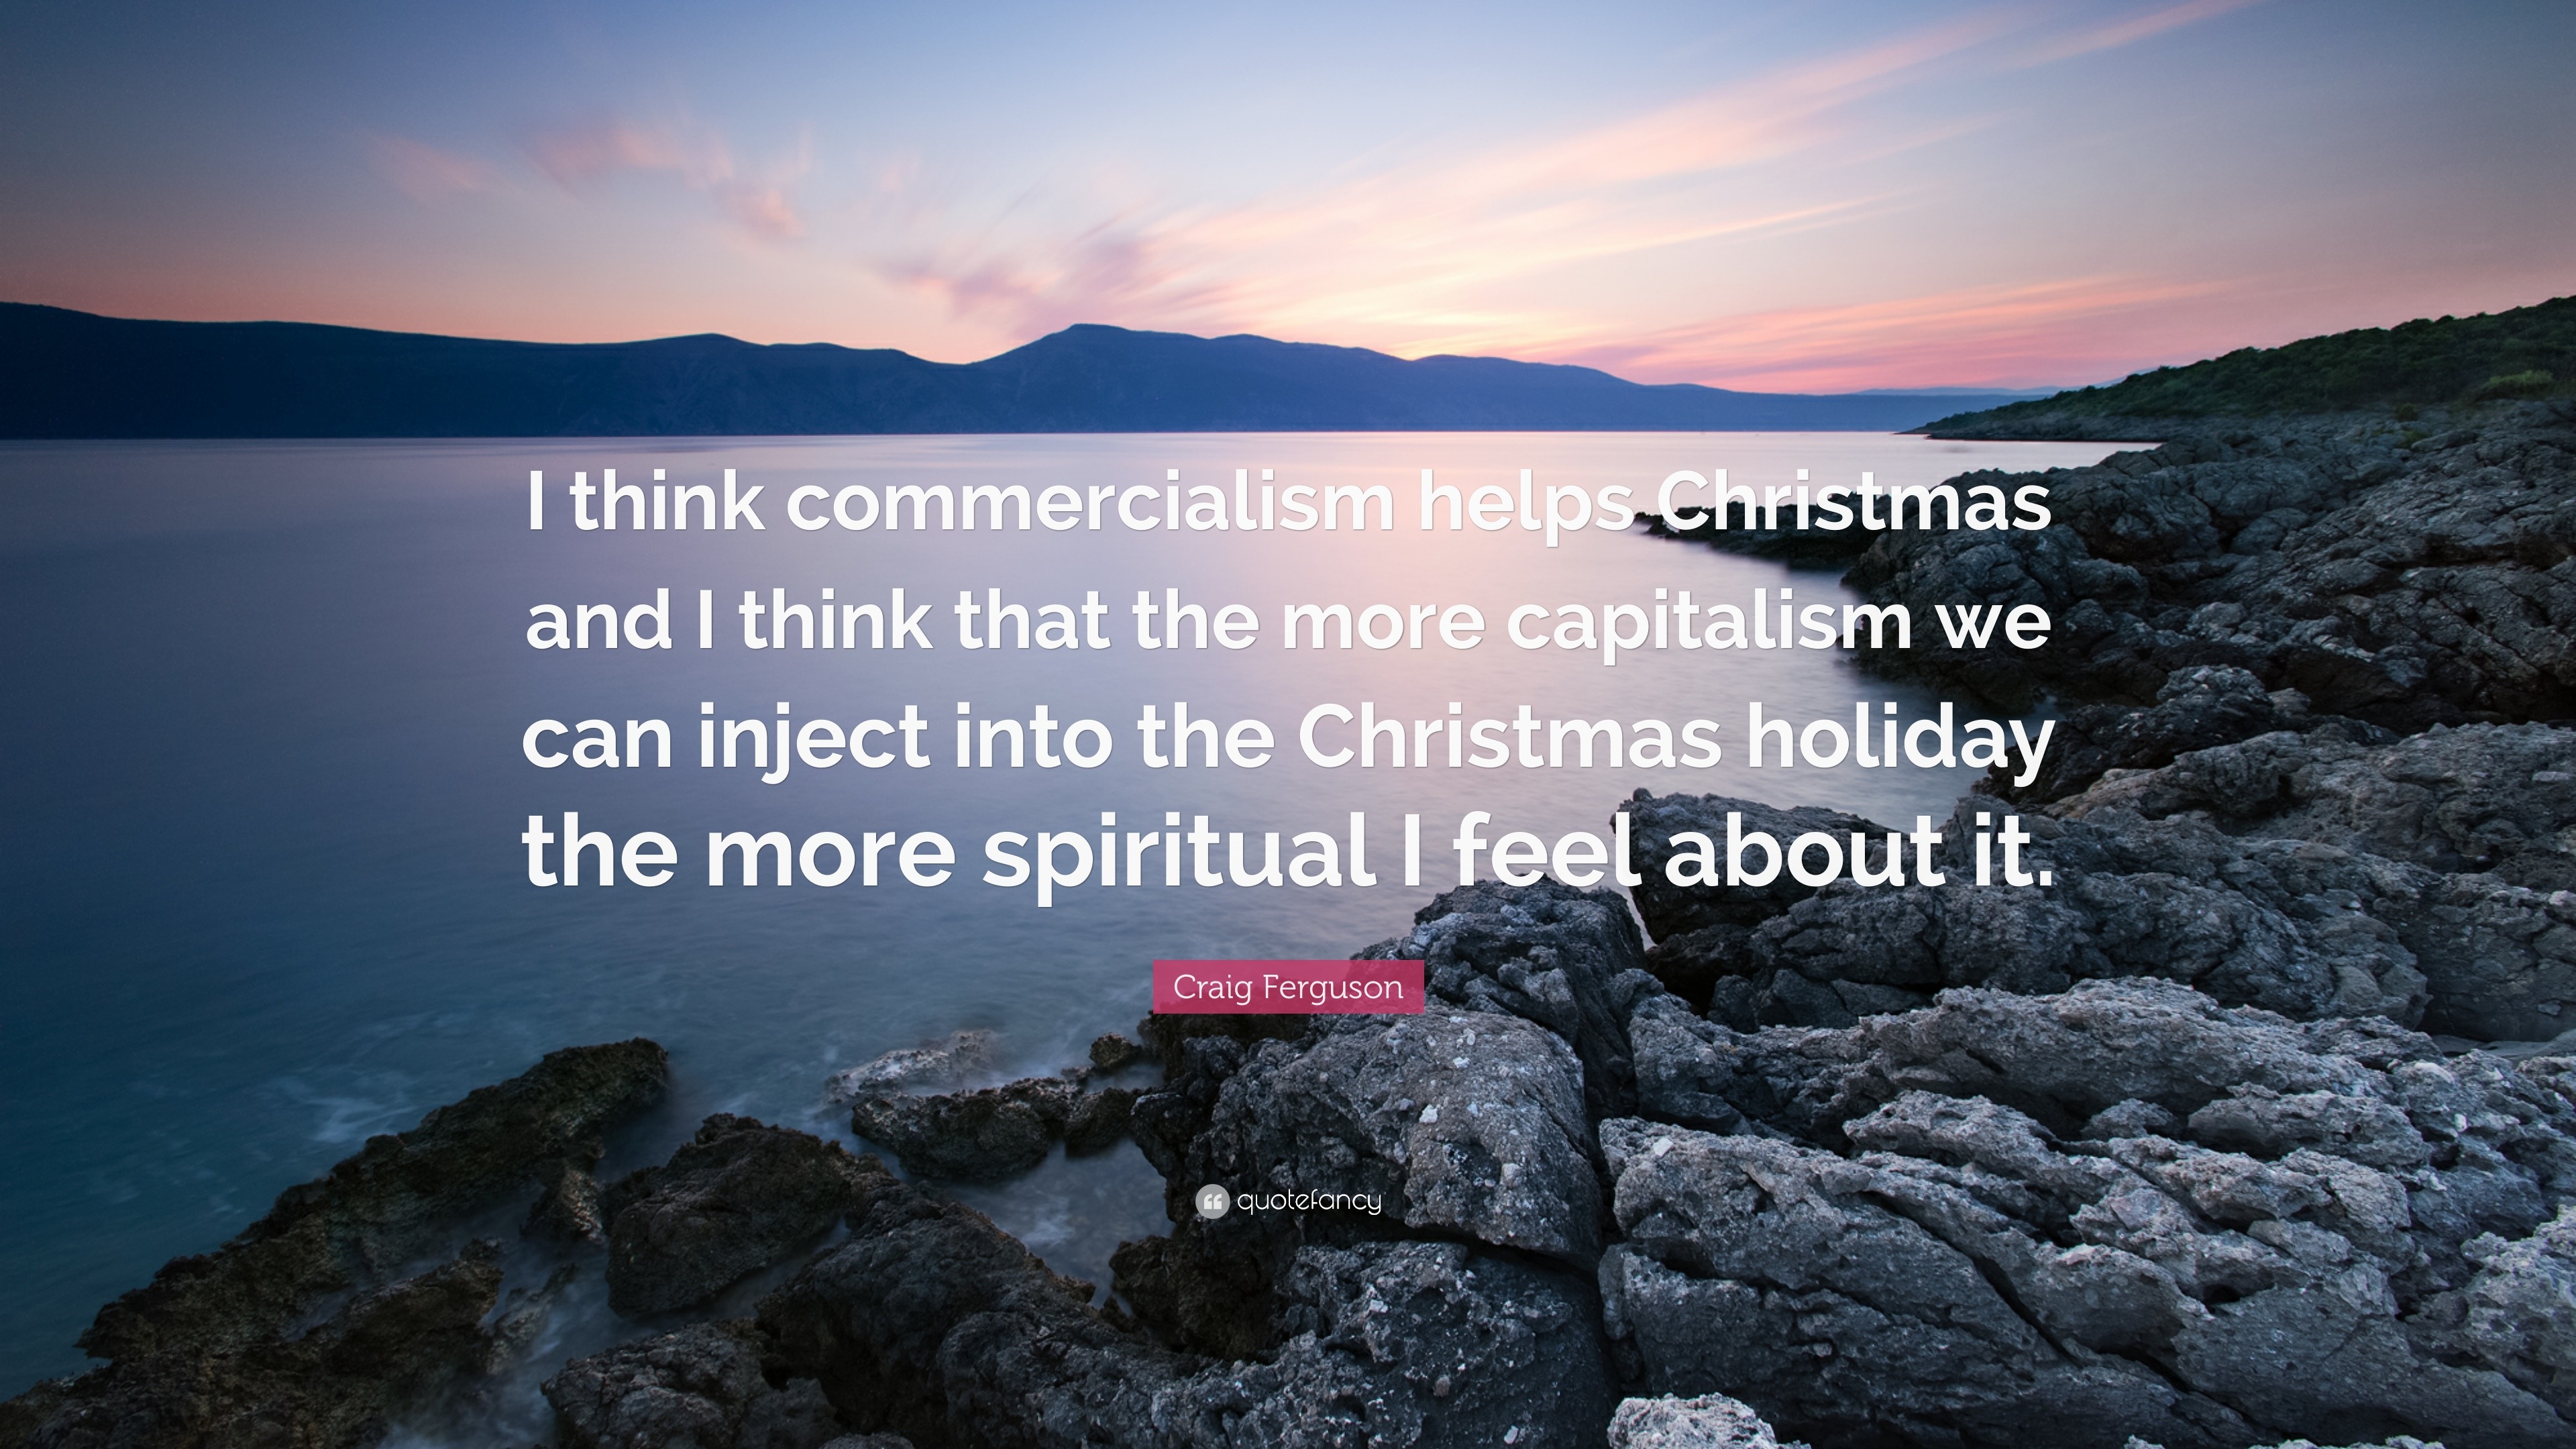 Craig Ferguson Quote I Think Commercialism Helps Christmas And I Think That The More Capitalism We Can Inject Into The Christmas Holiday The 6 Wallpapers Quotefancy